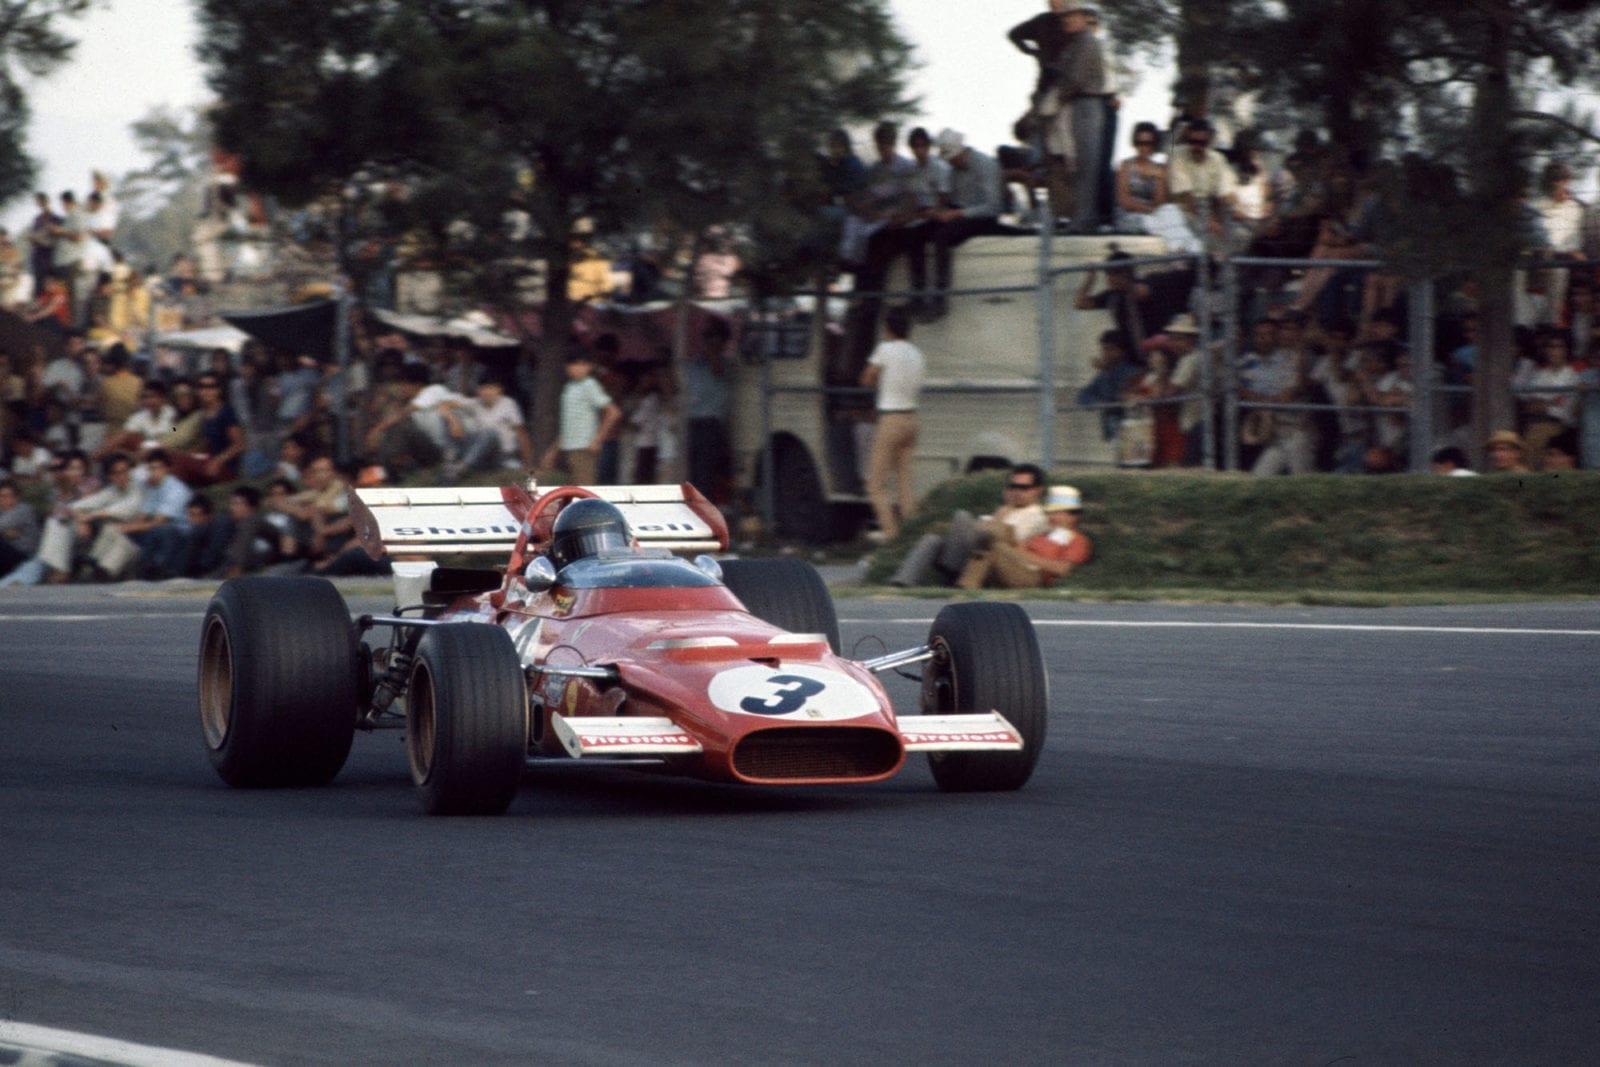 Jacky Ickx driving for Ferrari at the 1970 Mexican Grand Prix